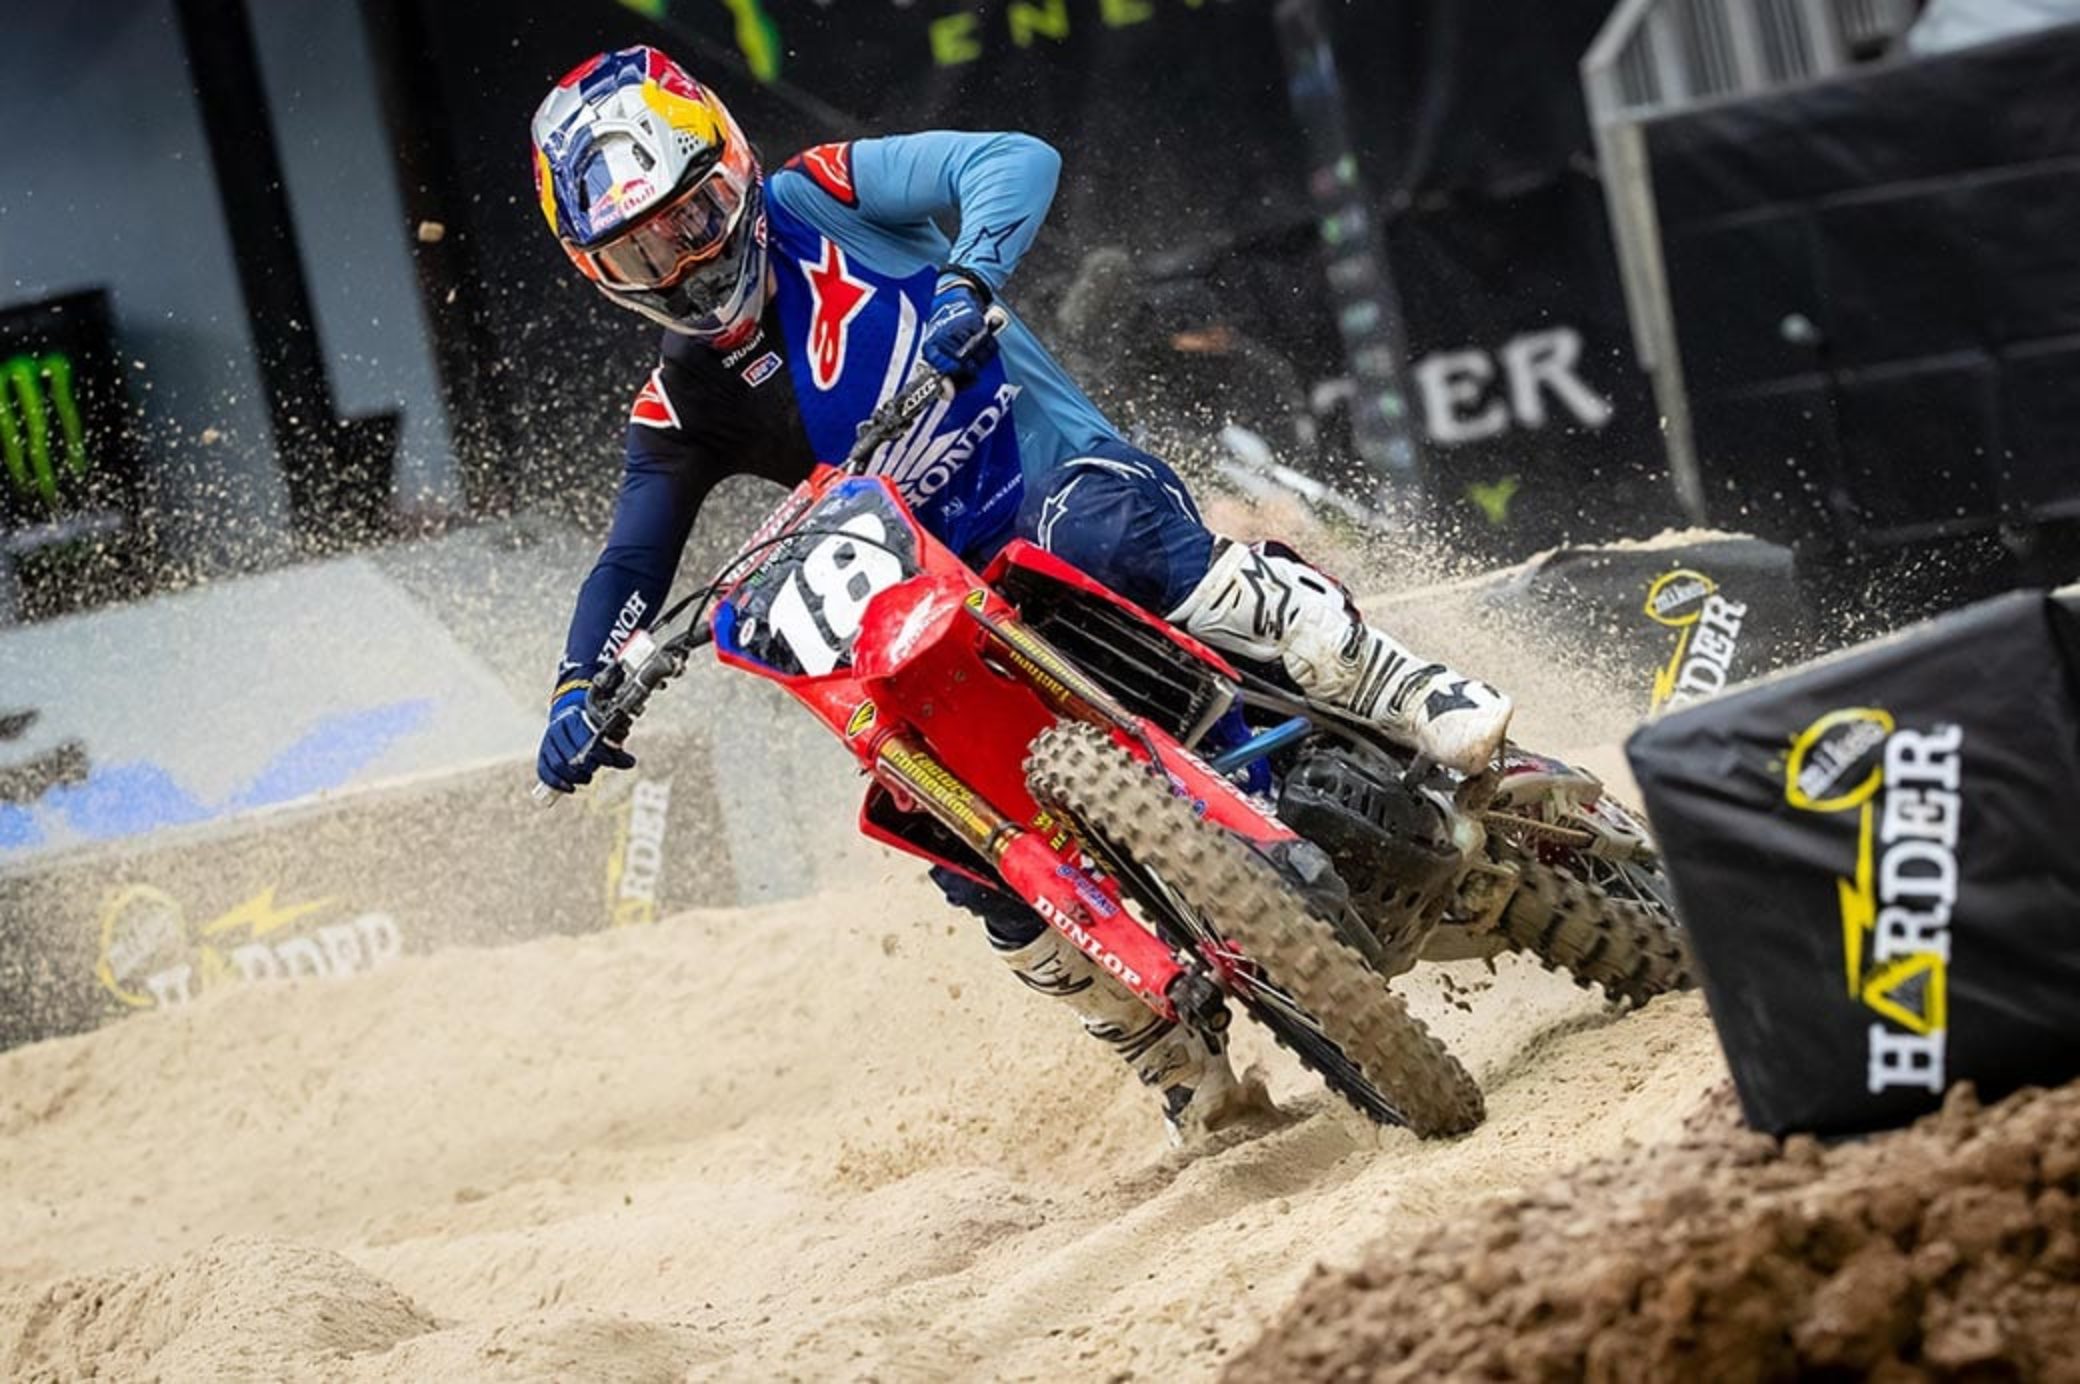 Jett Lawrence takes careerfirst 250SX win at Houston 2 Supercross